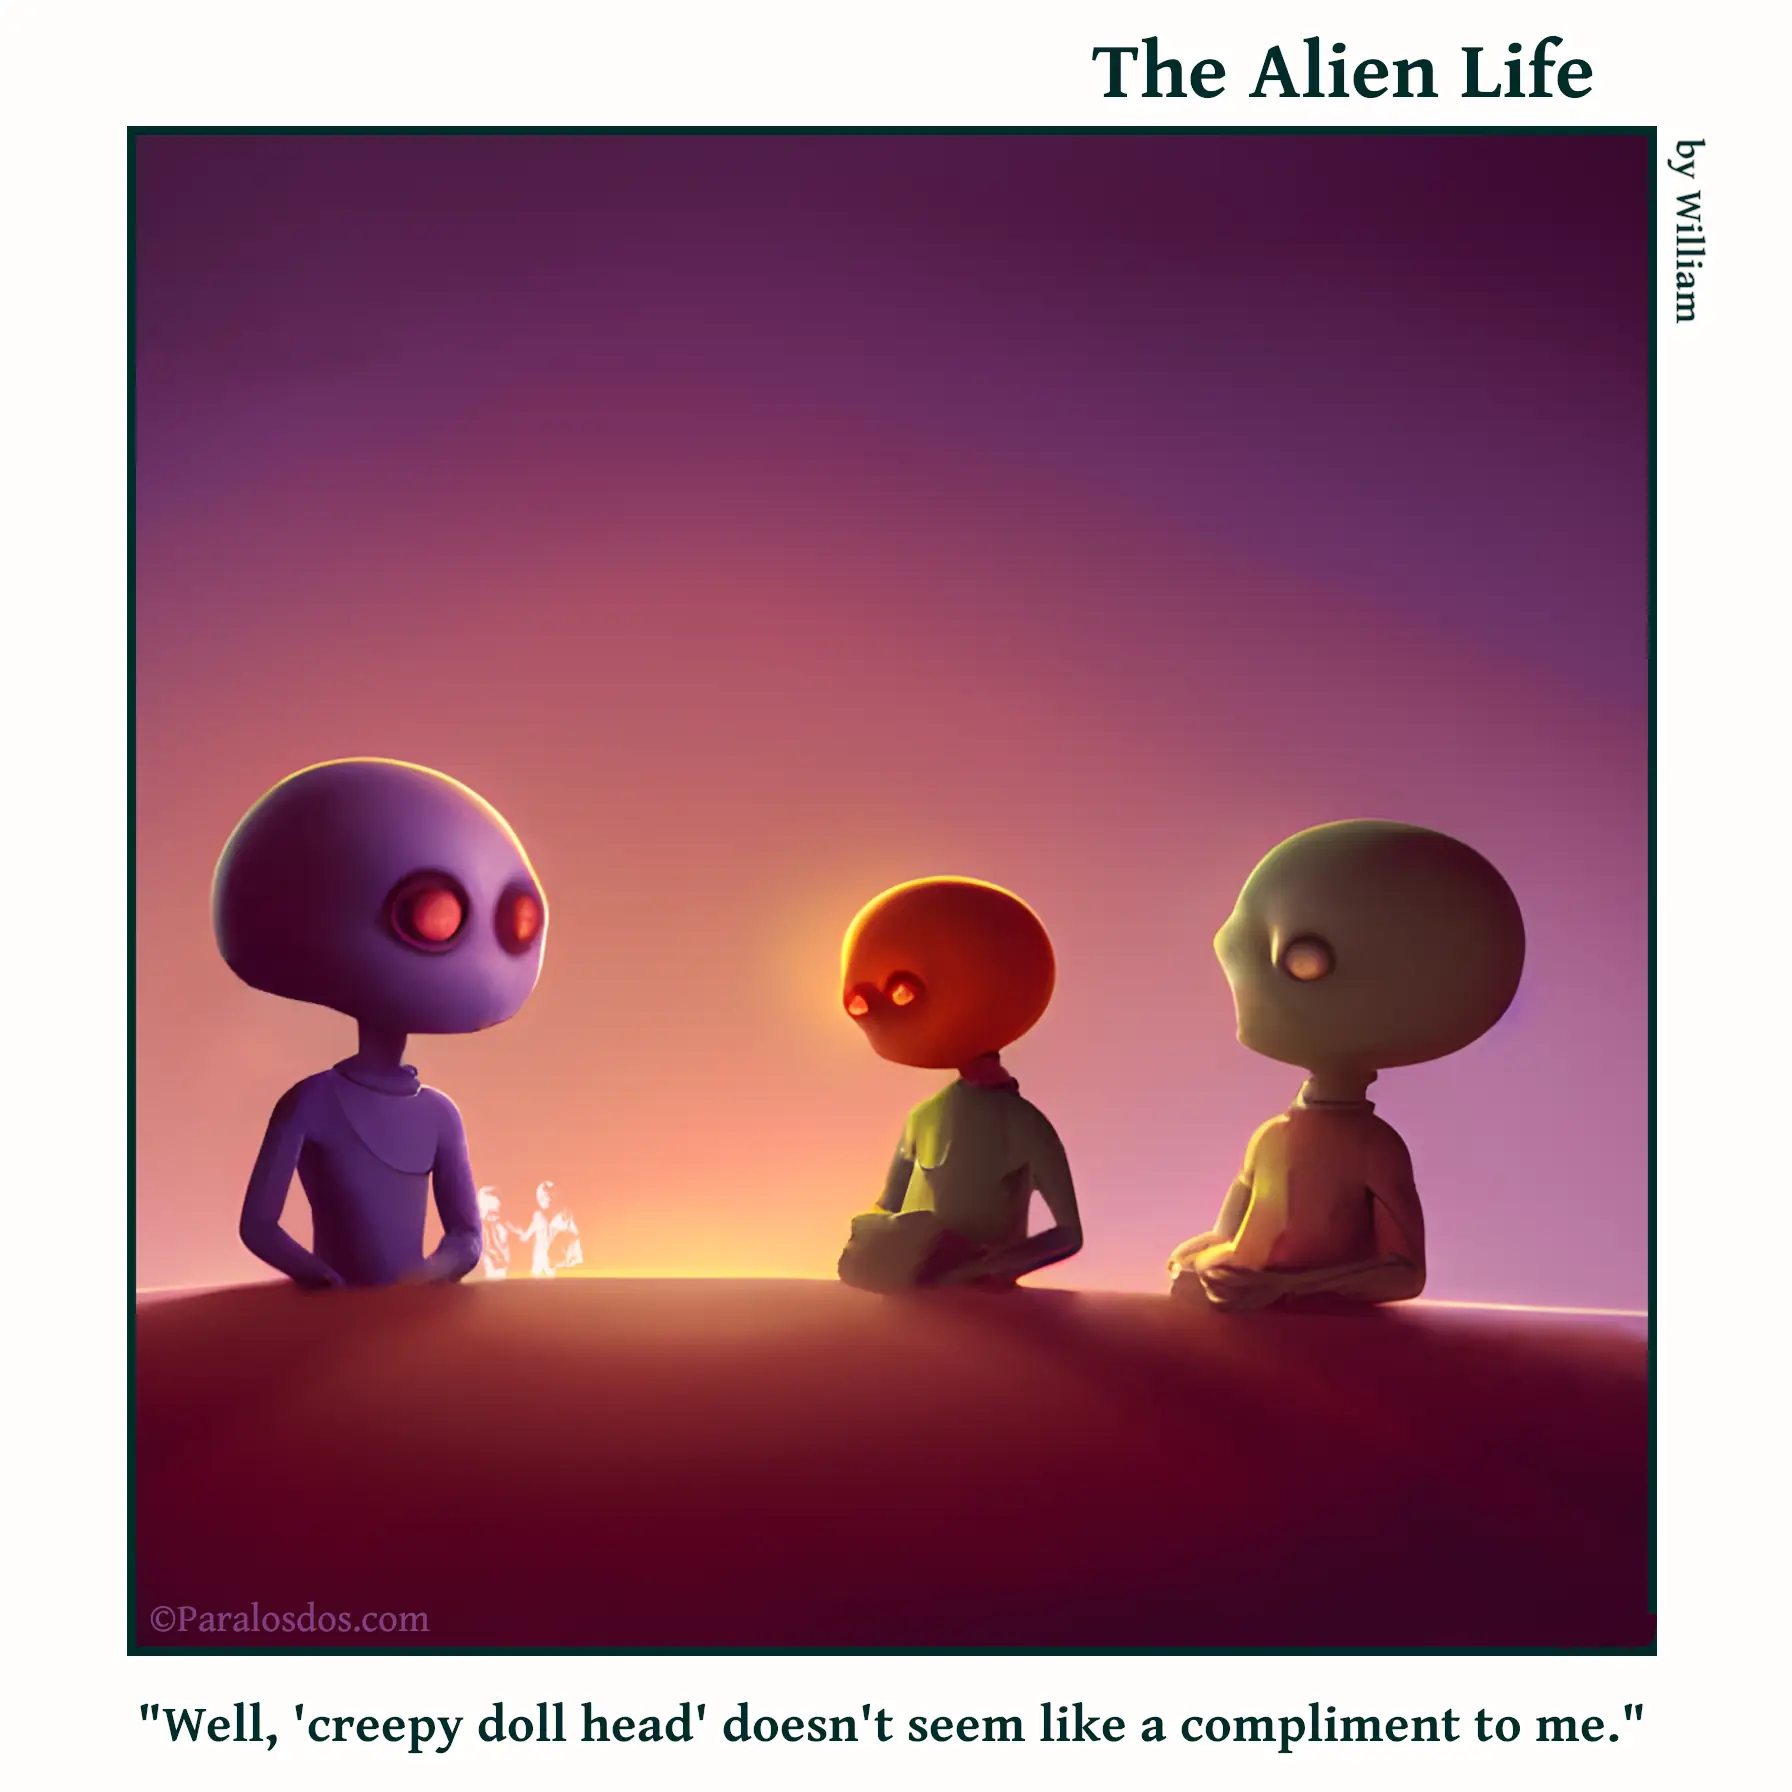 The Alien Life, one panel Comic. Three aliens with heads that look vaguely like a hairless dolls are sitting together. The caption reads: "Well, 'creepy doll head' doesn't seem like a compliment to me."